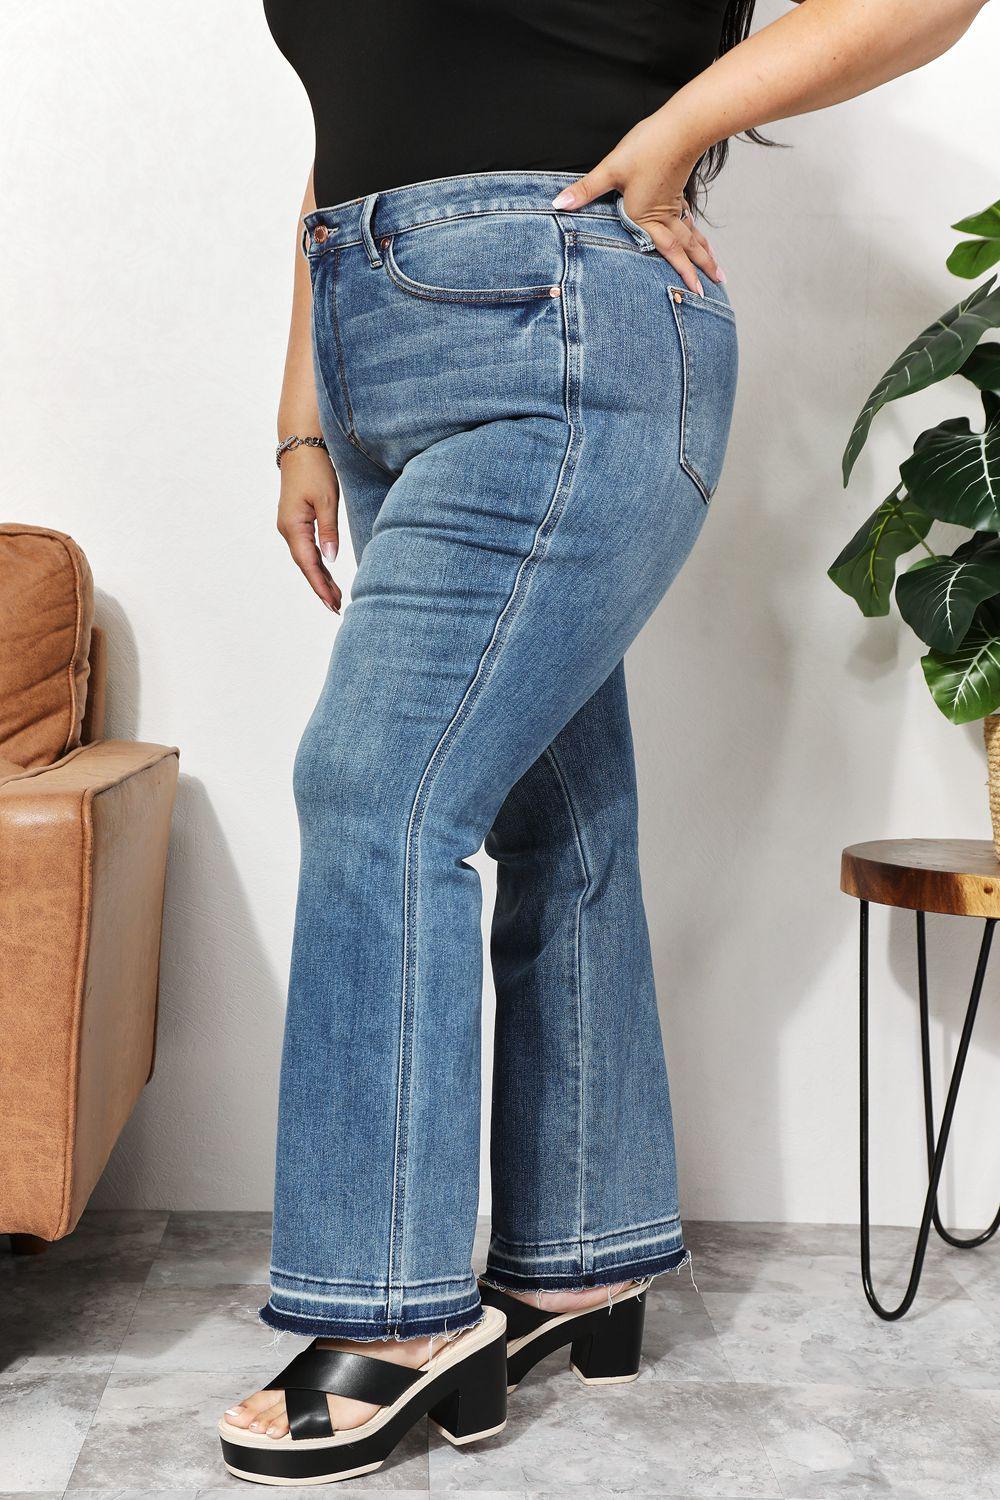 Judy Blue Full Size High Waist Jeans with Pockets - Lab Fashion, Home & Health